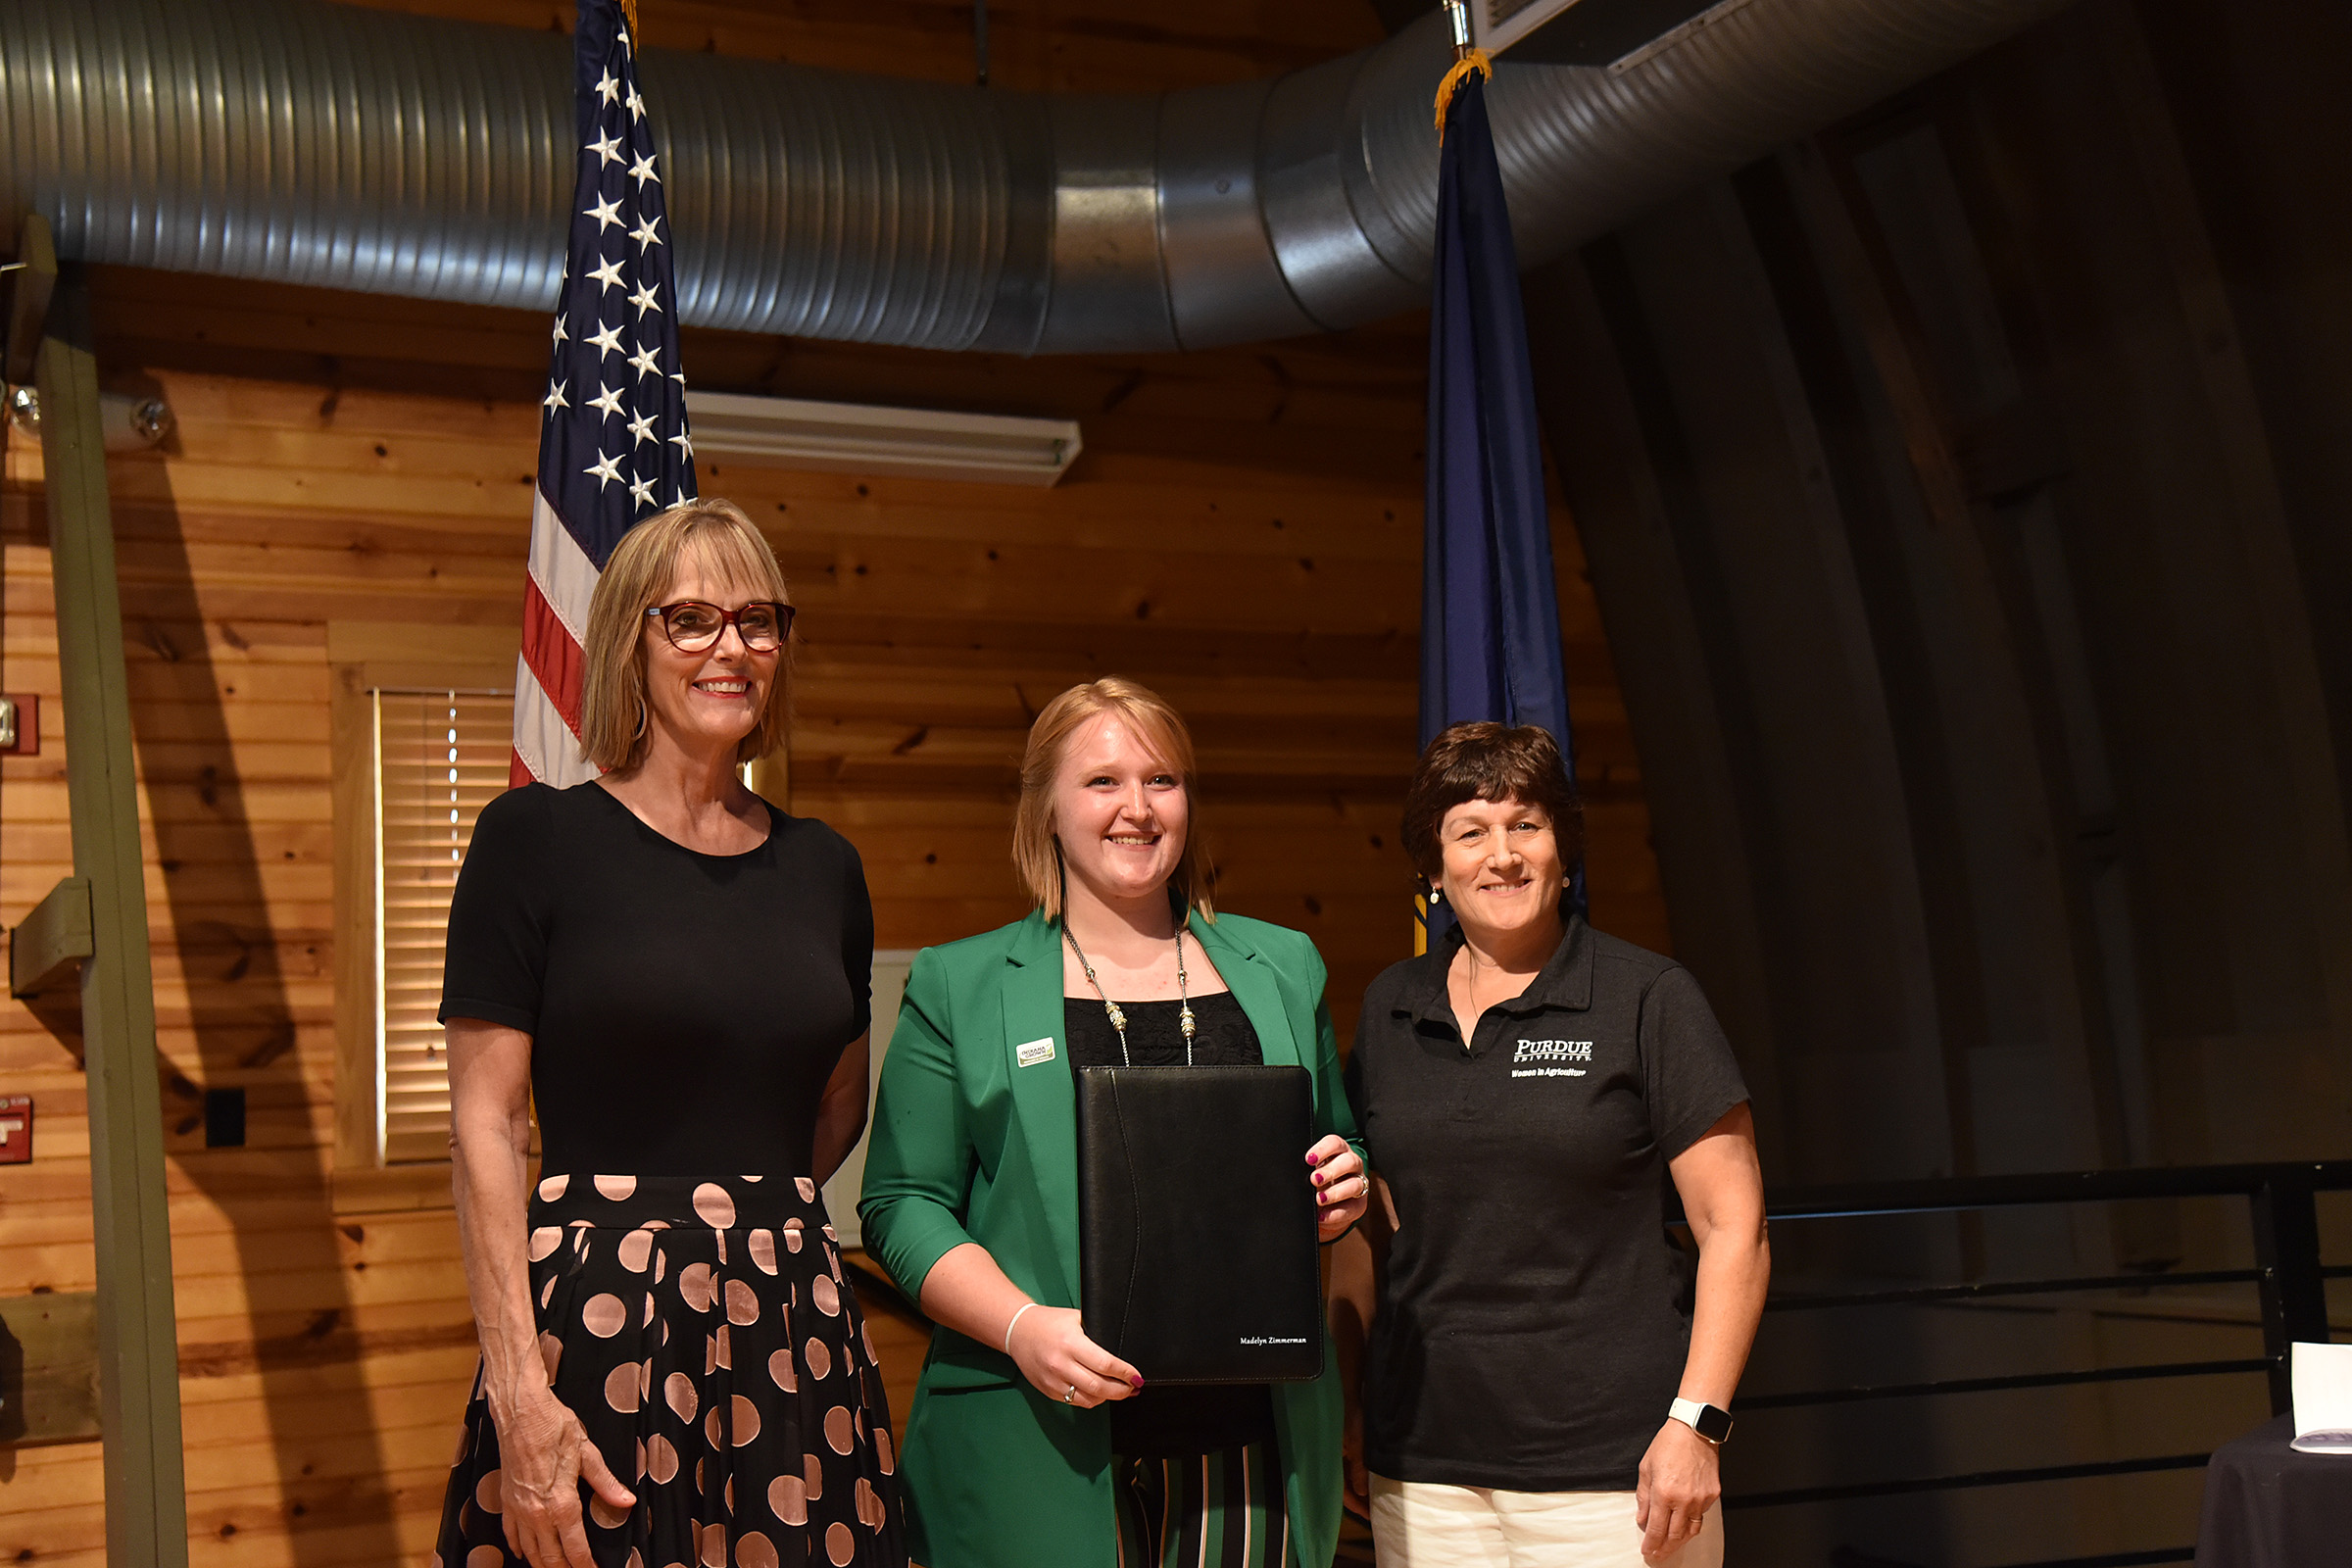 Suzanne Crouch, Madelyn Zimmerman and Karen Plut with the Women in Agriculture Award